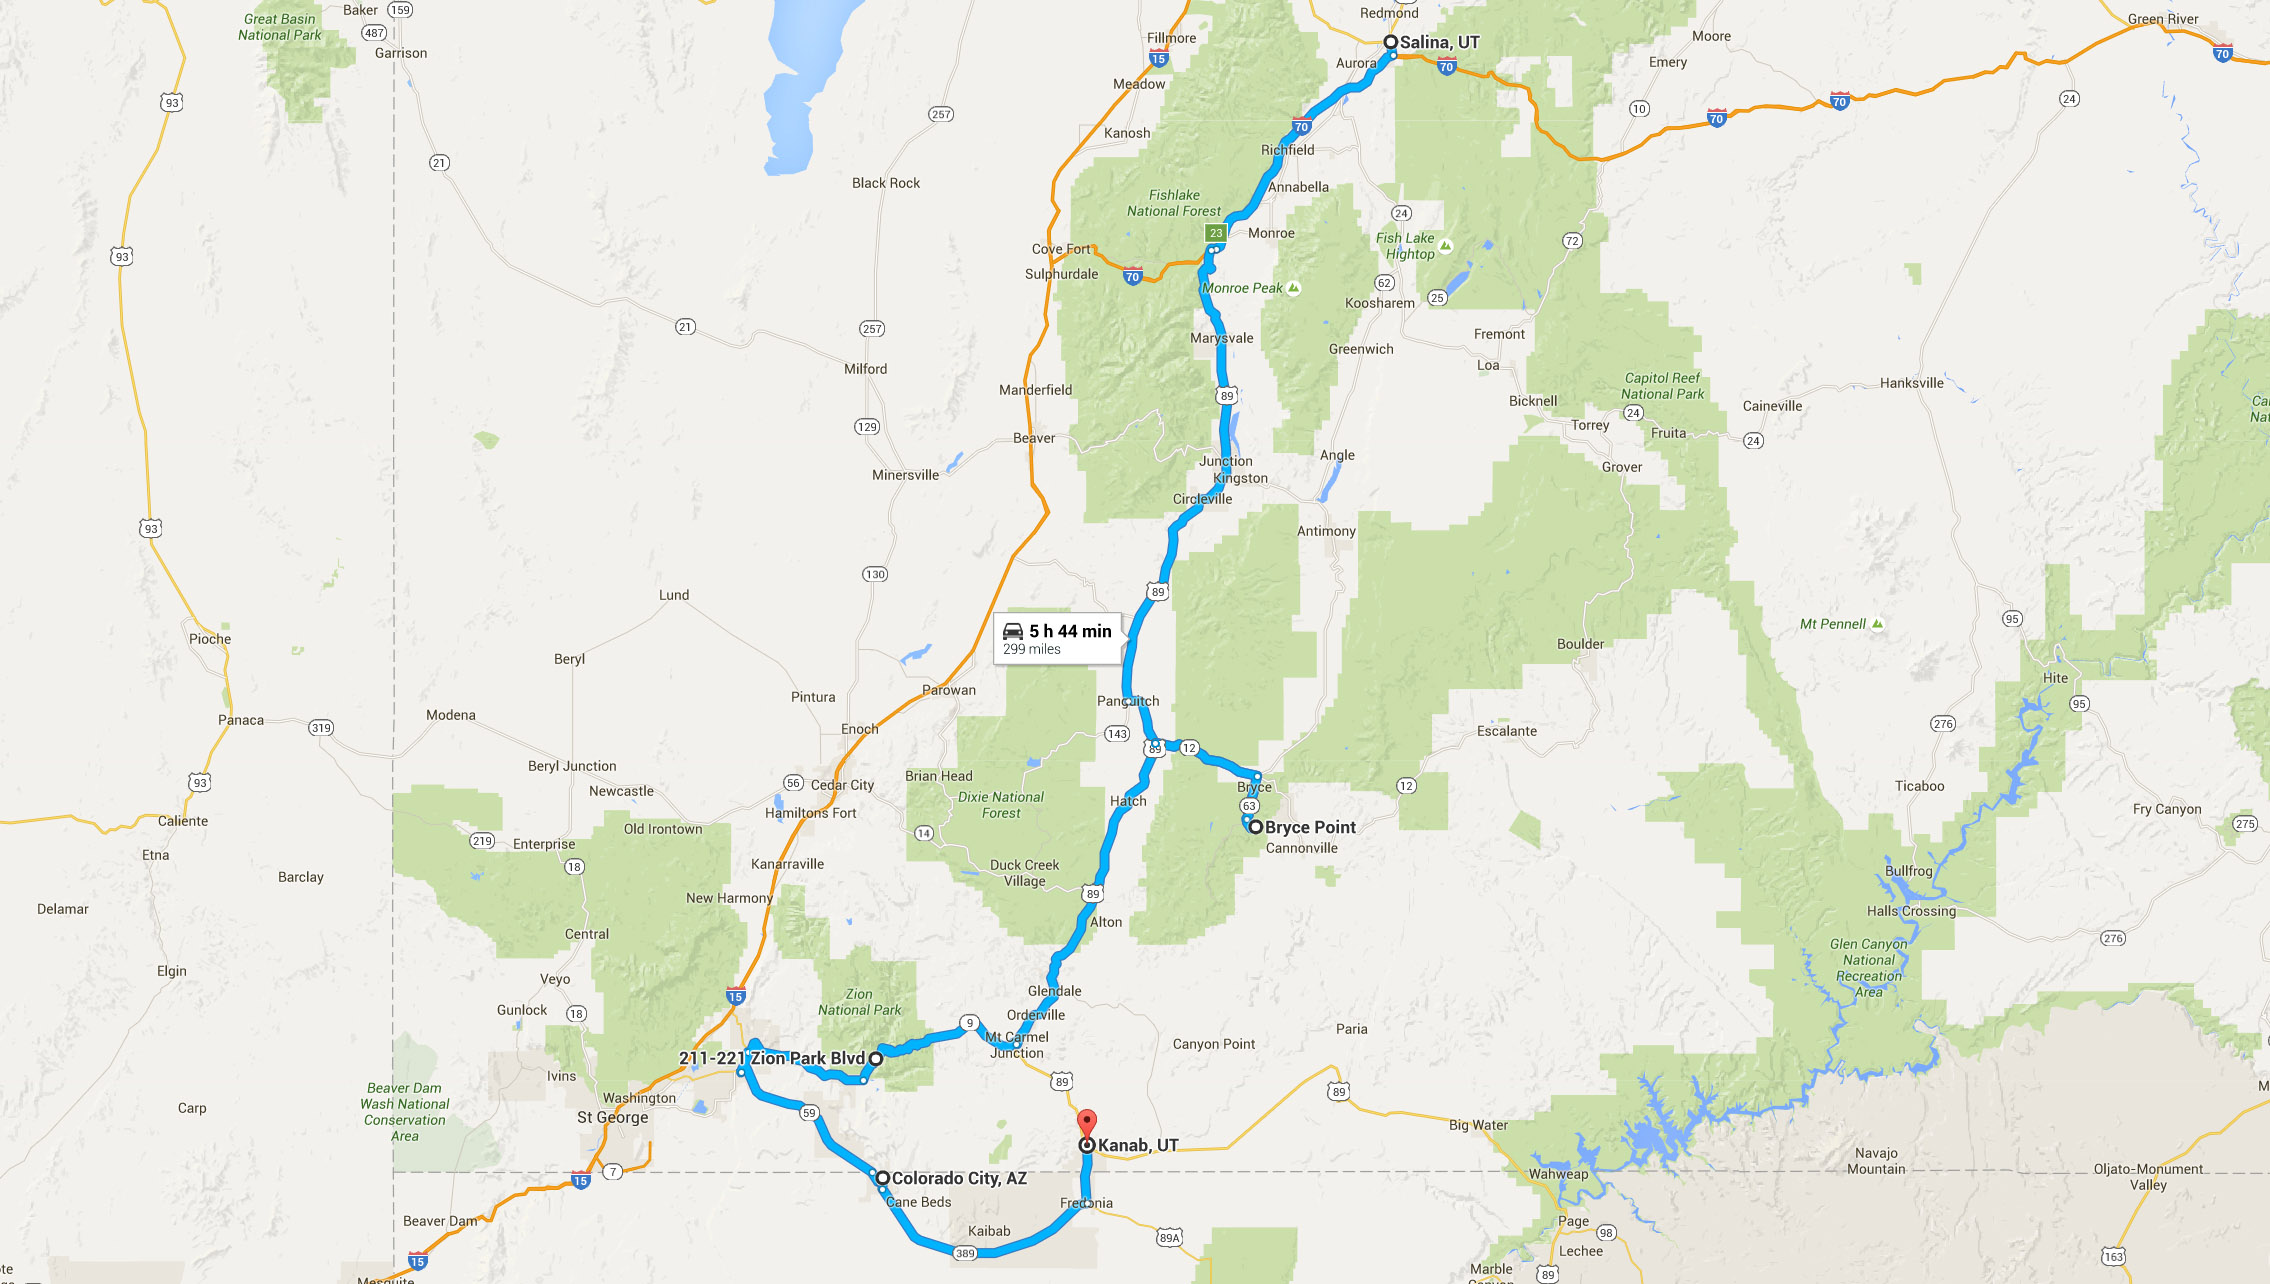 Day 5 route